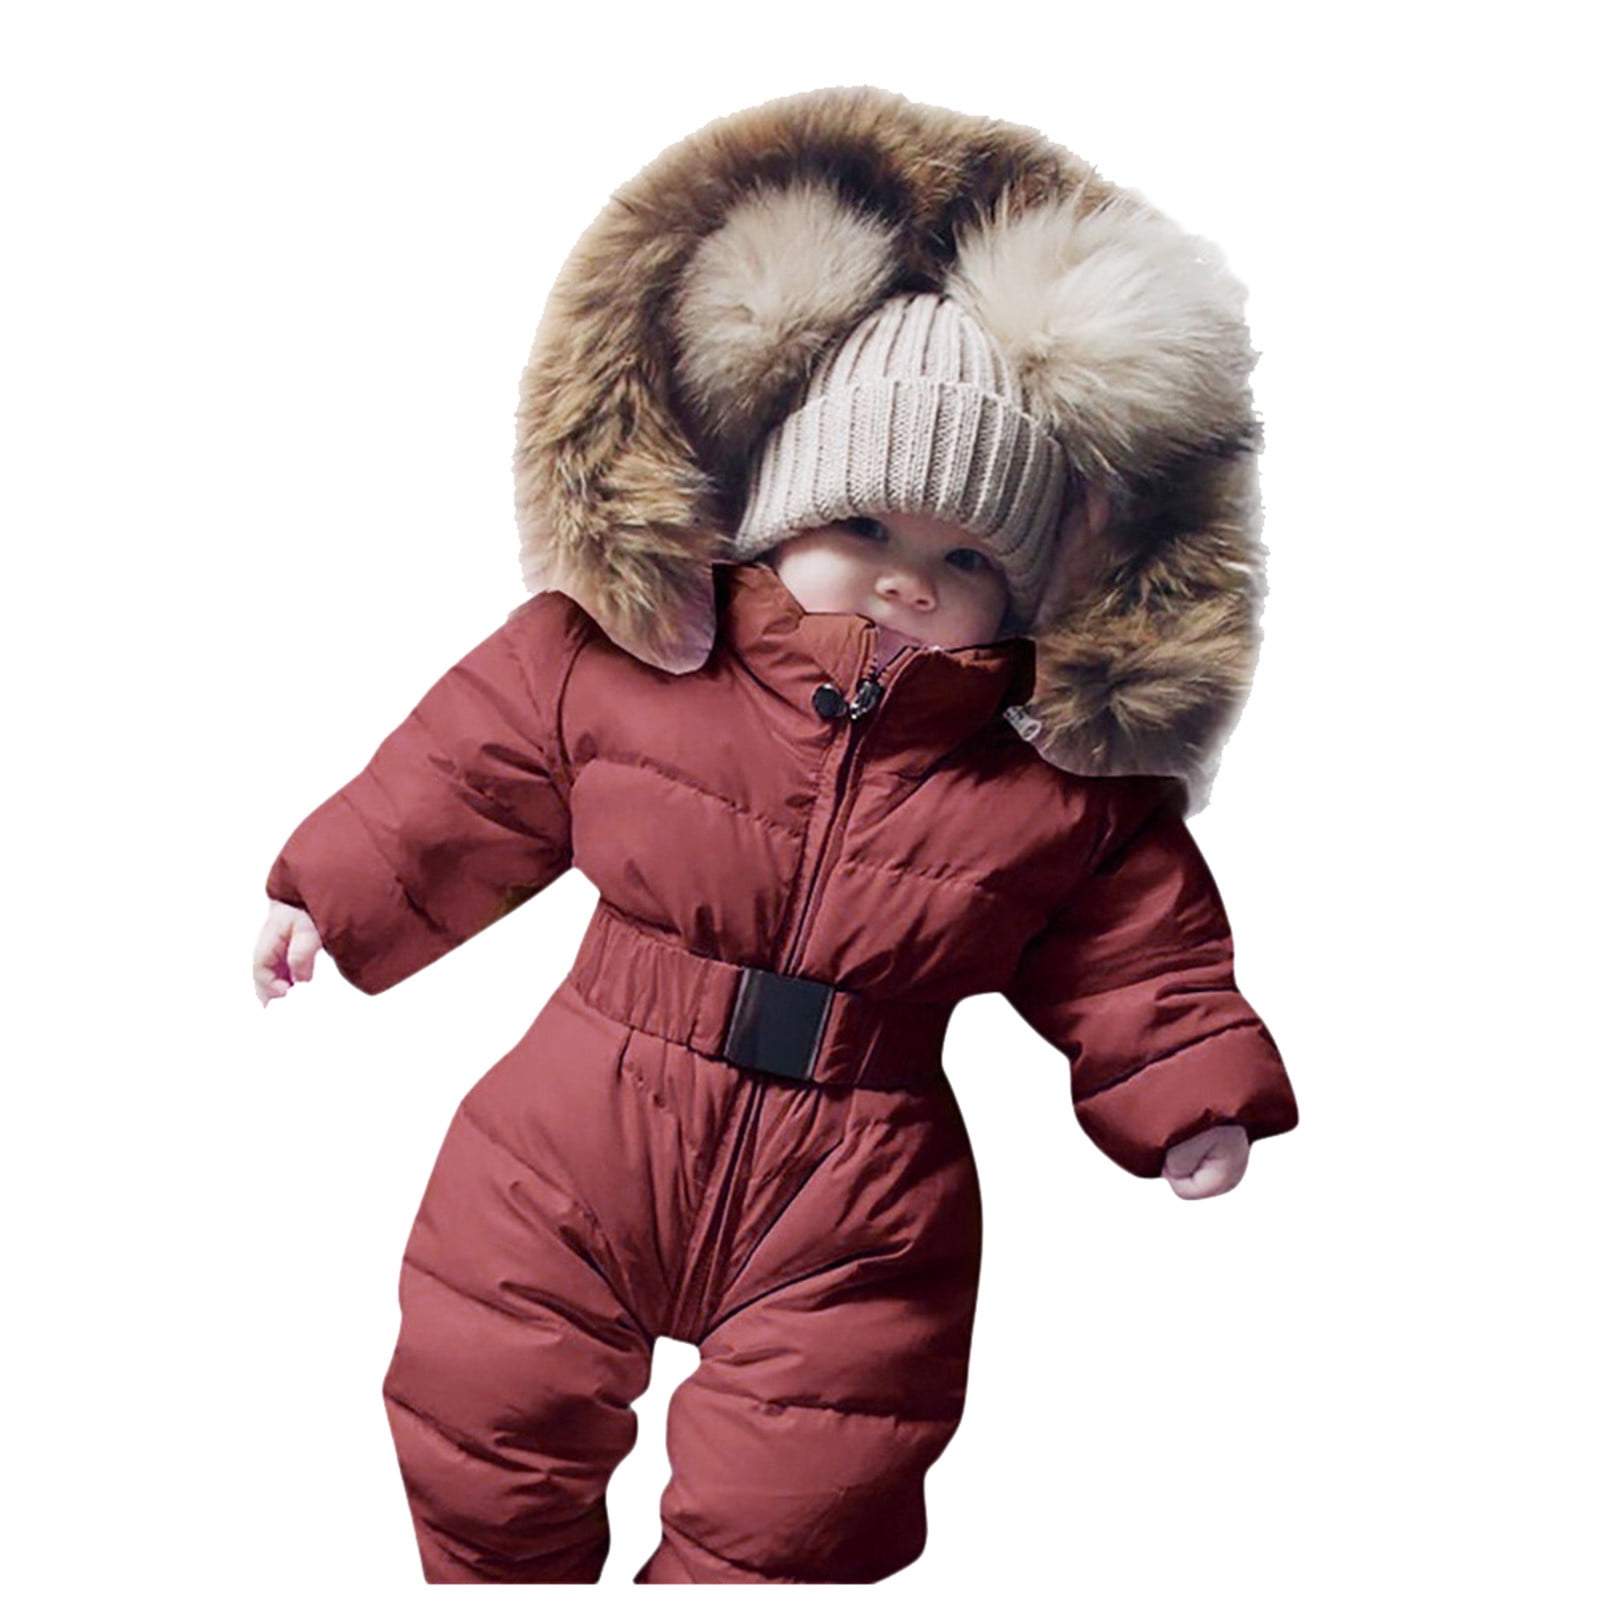 wofedyo Baby Girl Clothes Outerwear Romper Coat Warm Baby Jacket ...